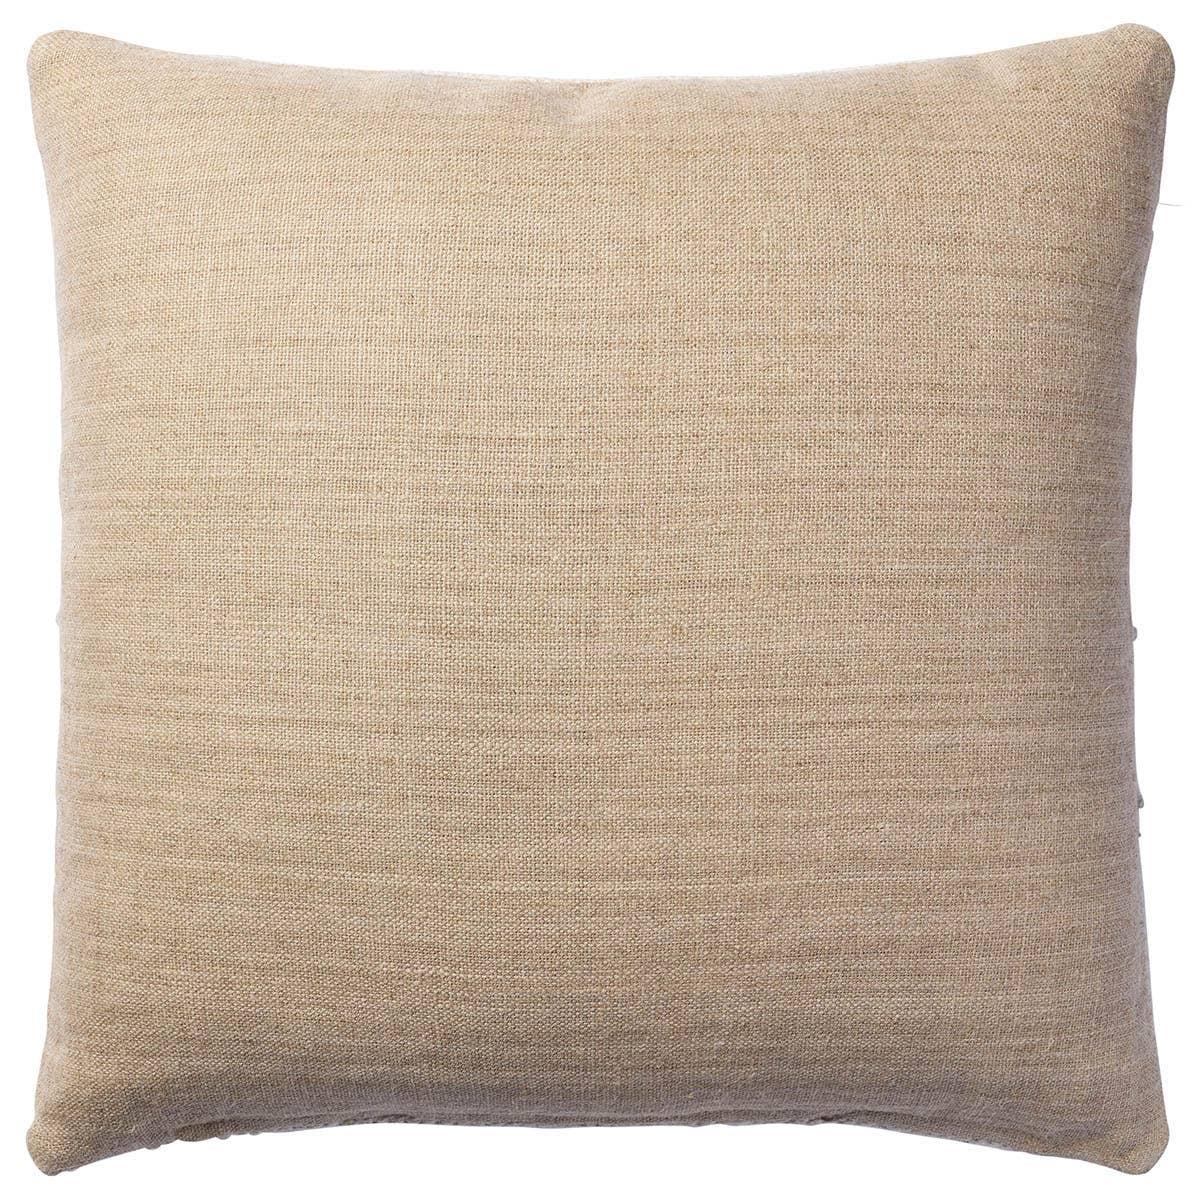 The handmade Idyllwild throw pillow is crafted with 100% wool for a durable and natural accent piece. This design features two parallel charcoal stripes paired with beige and cream with specs of gray and rust throughout.Indoor Pillow Amethyst Home provides interior design, new home construction design consulting, vintage area rugs, and lighting in the Dallas metro area.